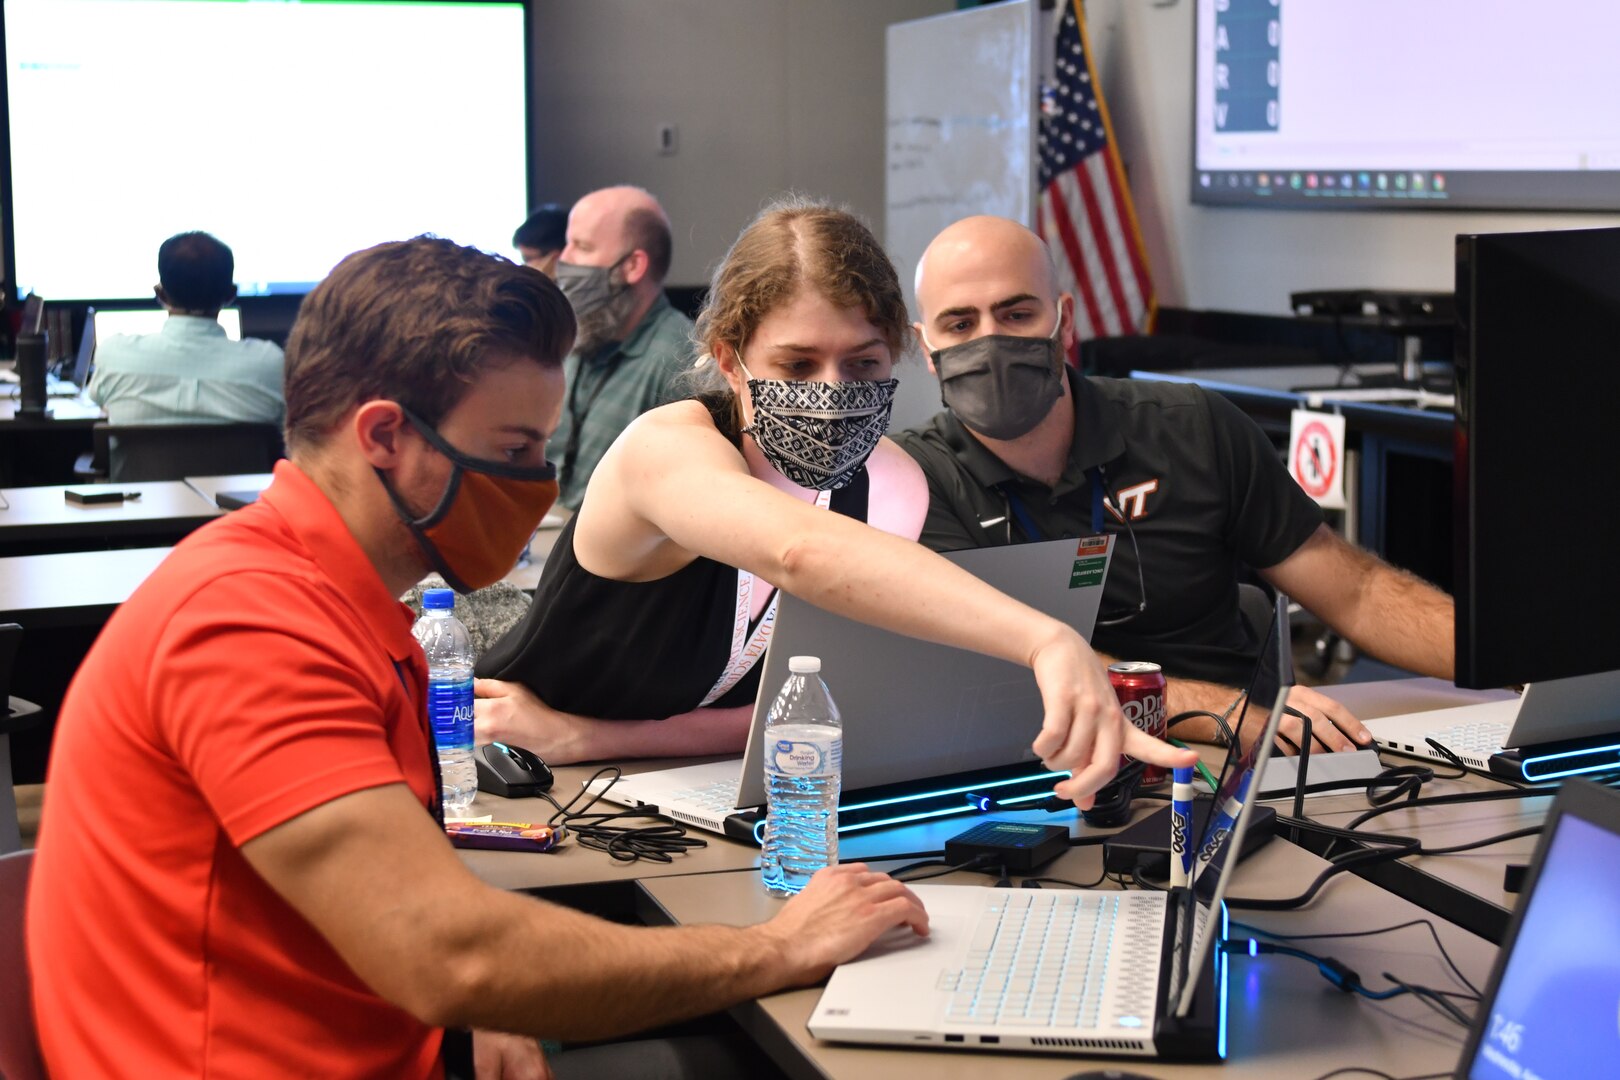 IMAGE: (Left to right) NSWCDD Integrated Combat Systems employees Justin Foulks, Katelyn Barbre and Brandon Marine troubleshoot their solution at the NSWCDD Innovation Lab’s wargaming hackathon on Aug. 11. Teams used their artificial intelligence and machine learning backgrounds to compete against other departments at the event Aug.11-13.